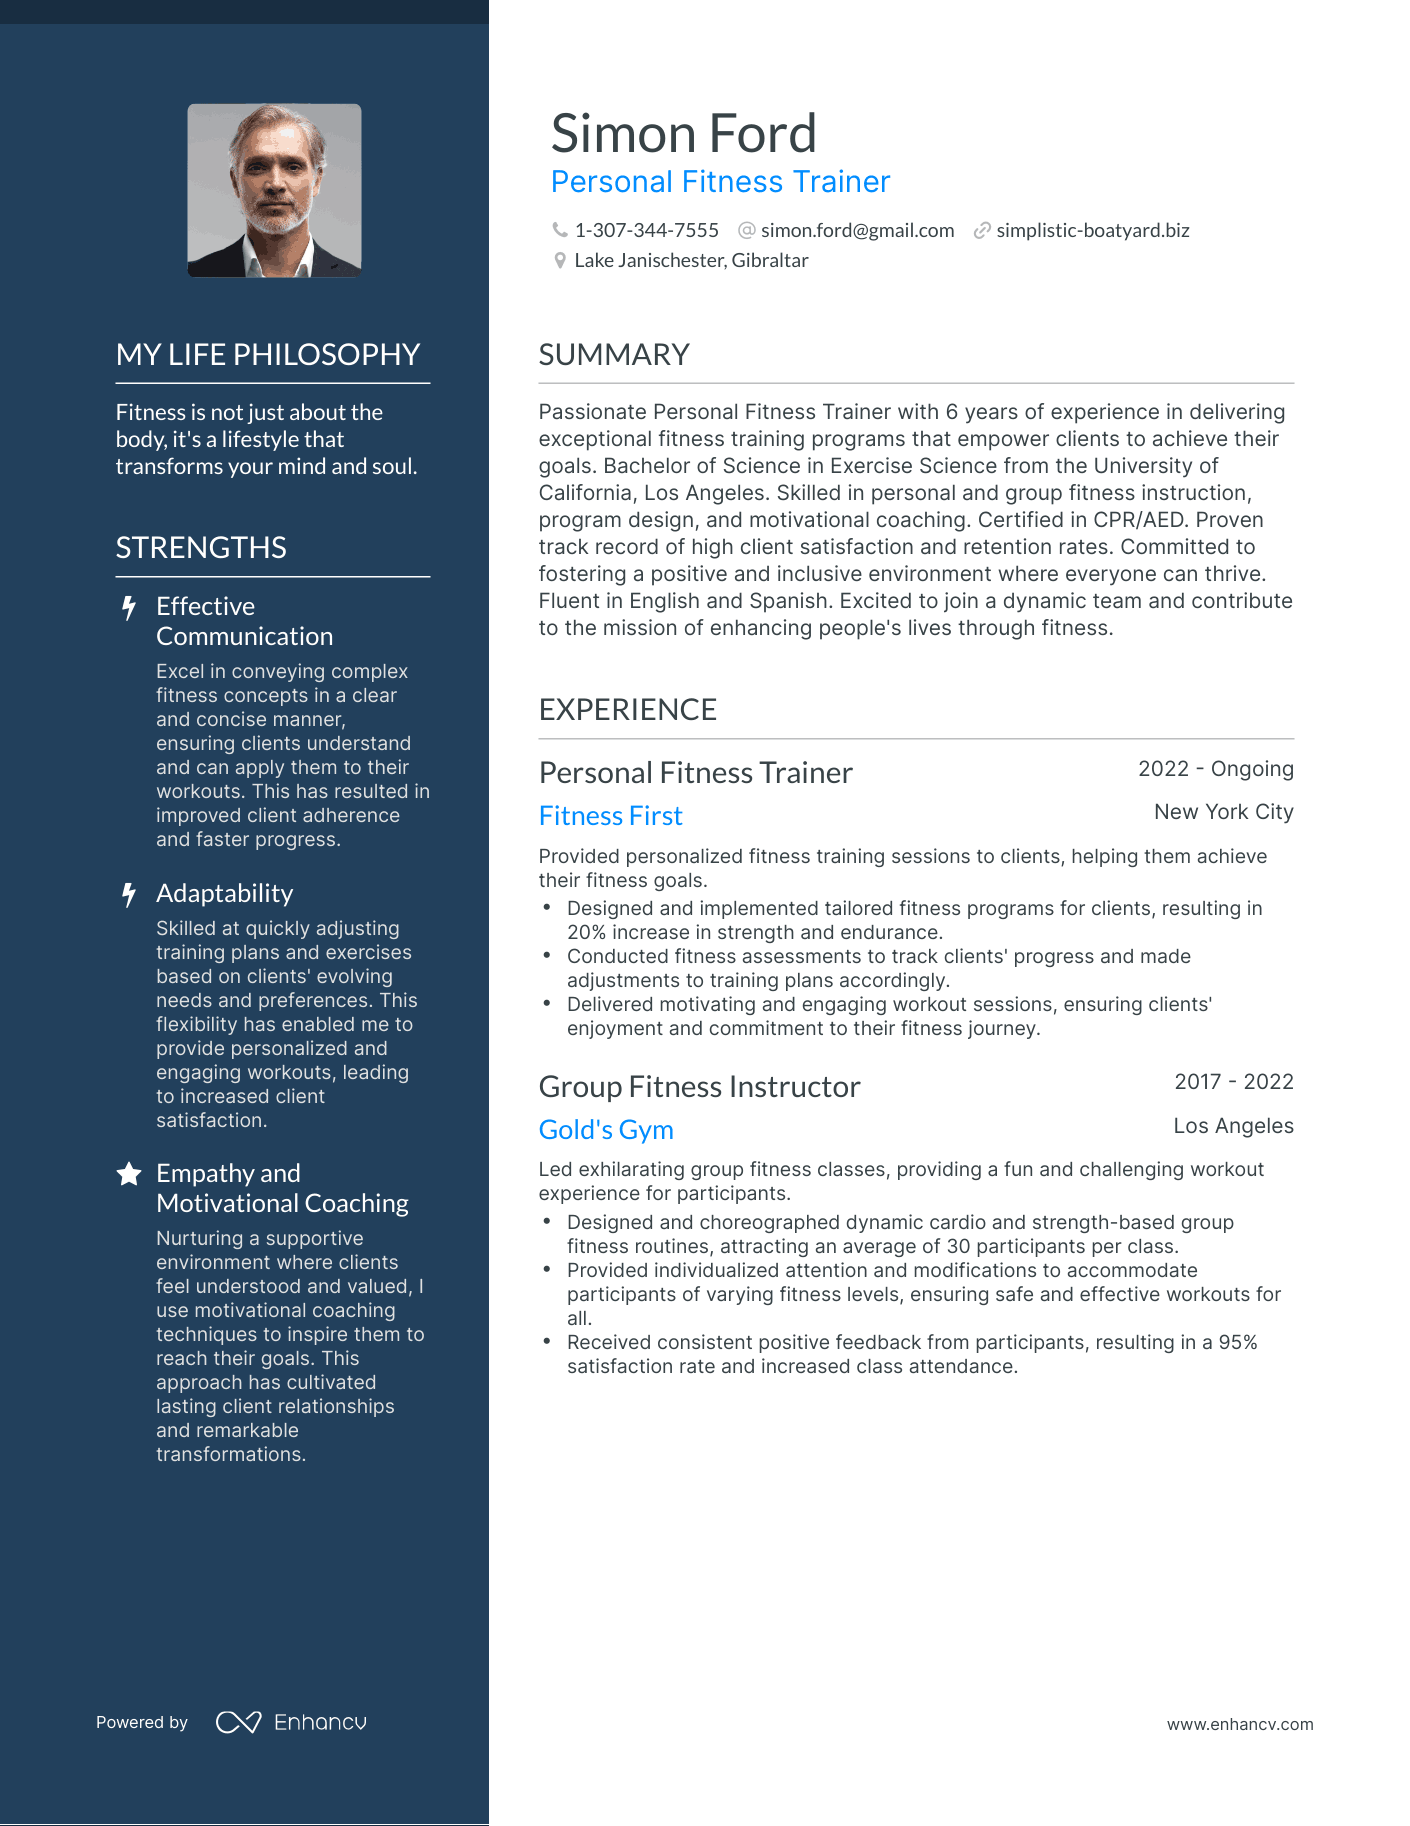 Personal Fitness Trainer resume example